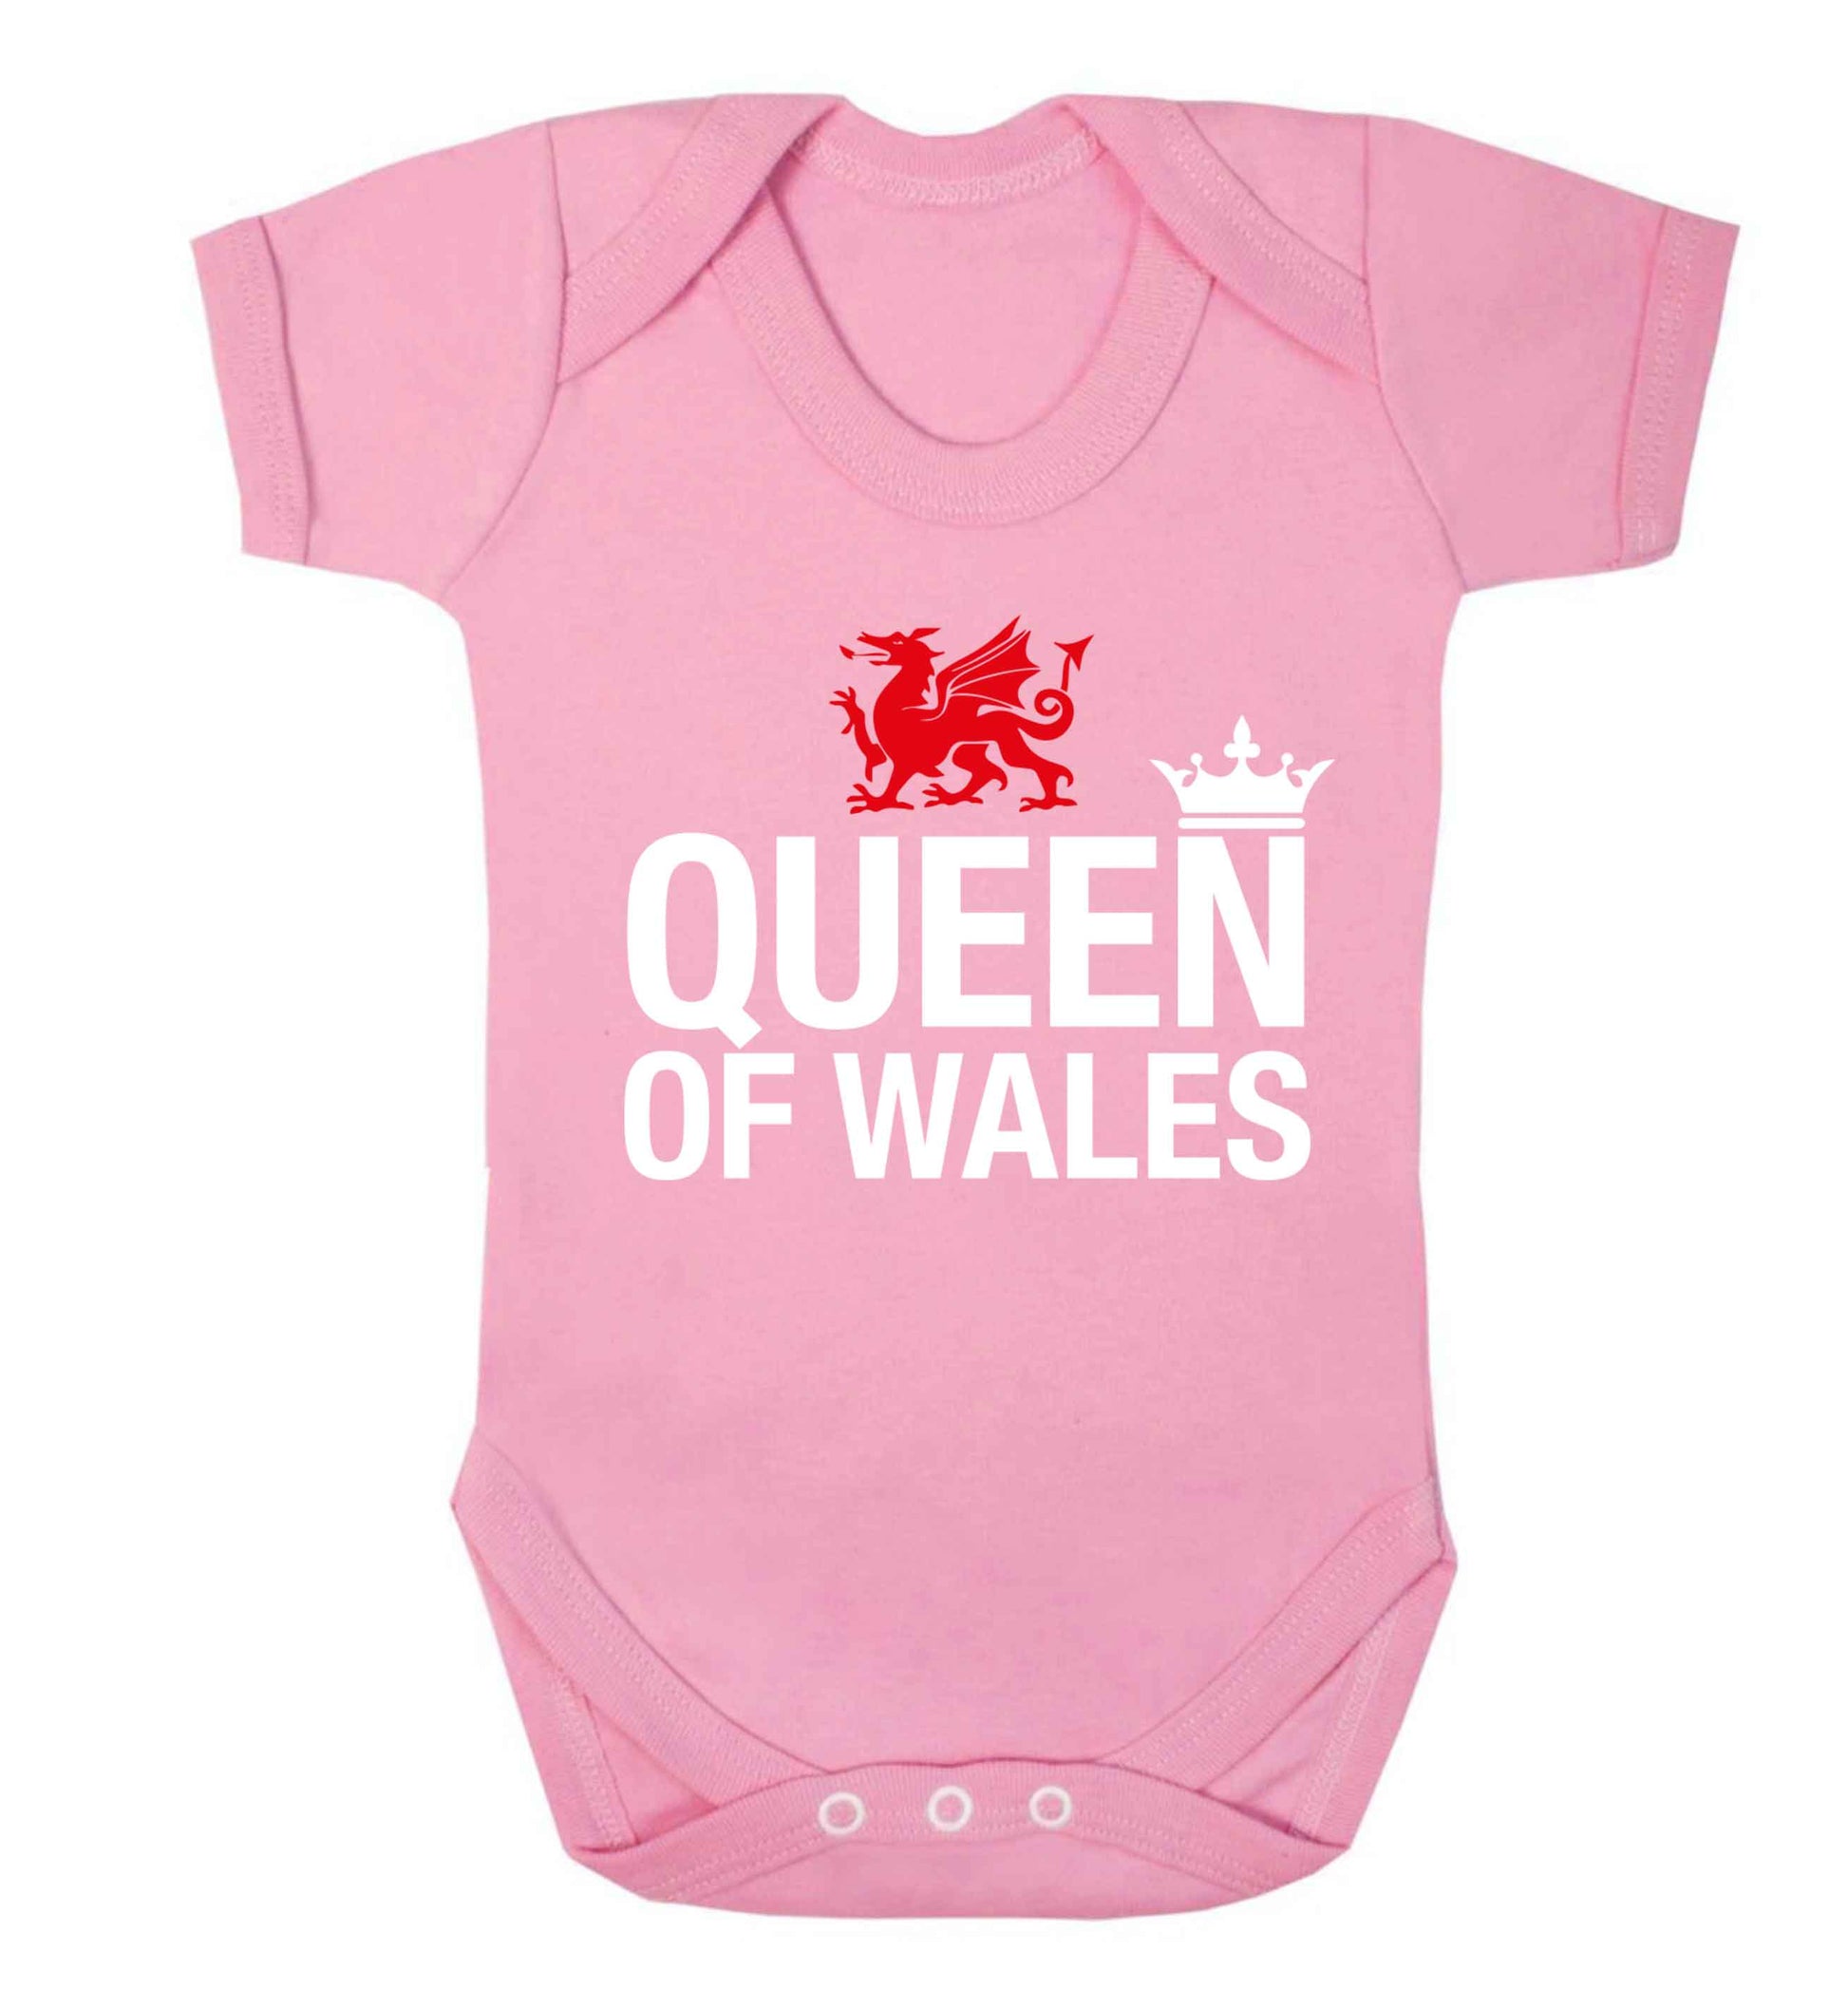 Queen of Wales Baby Vest pale pink 18-24 months